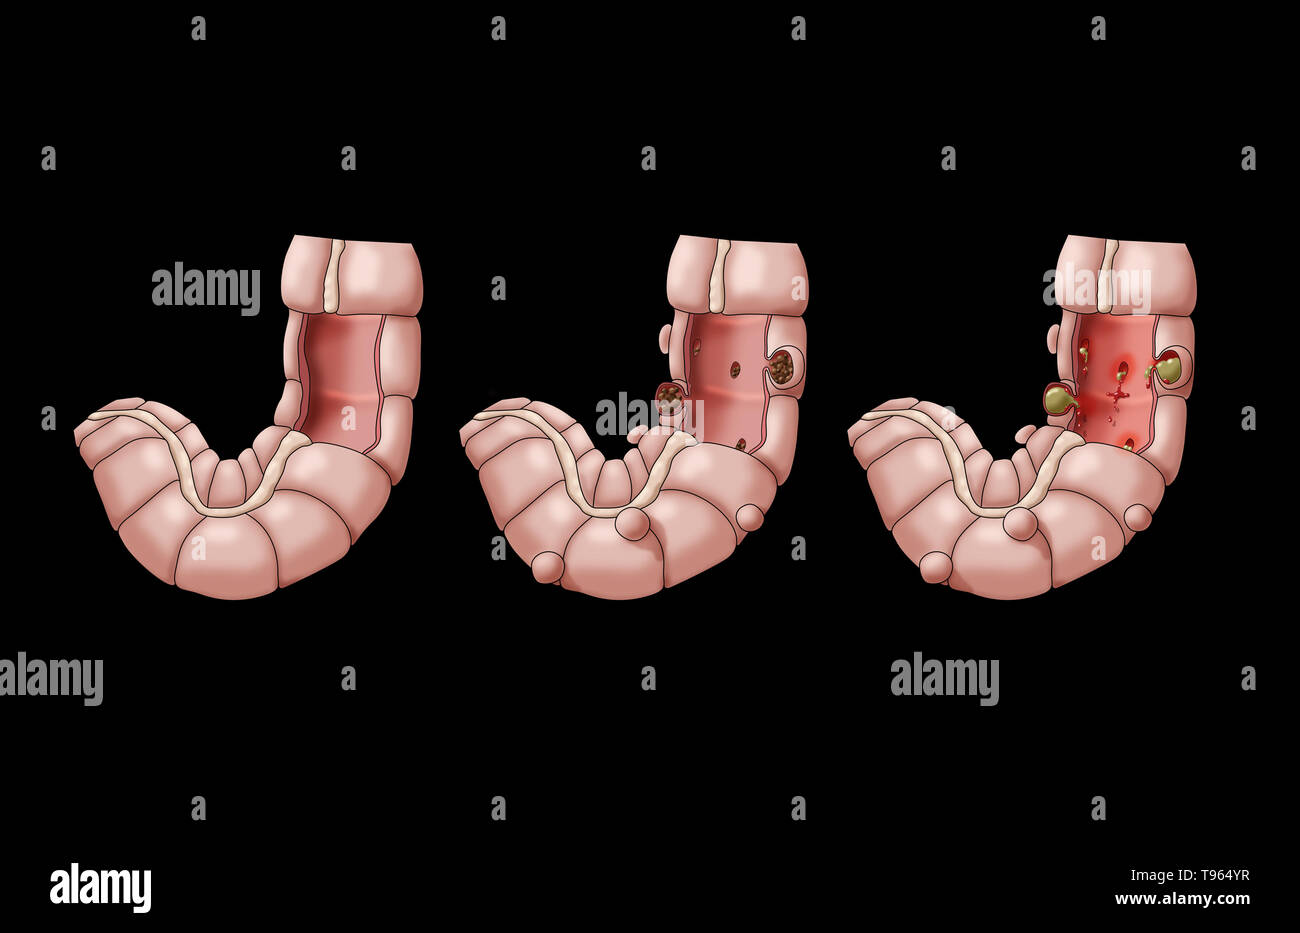 Illustration comparing the appearance of a healthy colon (left); diverticulosis (middle); and diverticulitis (right). Stock Photo